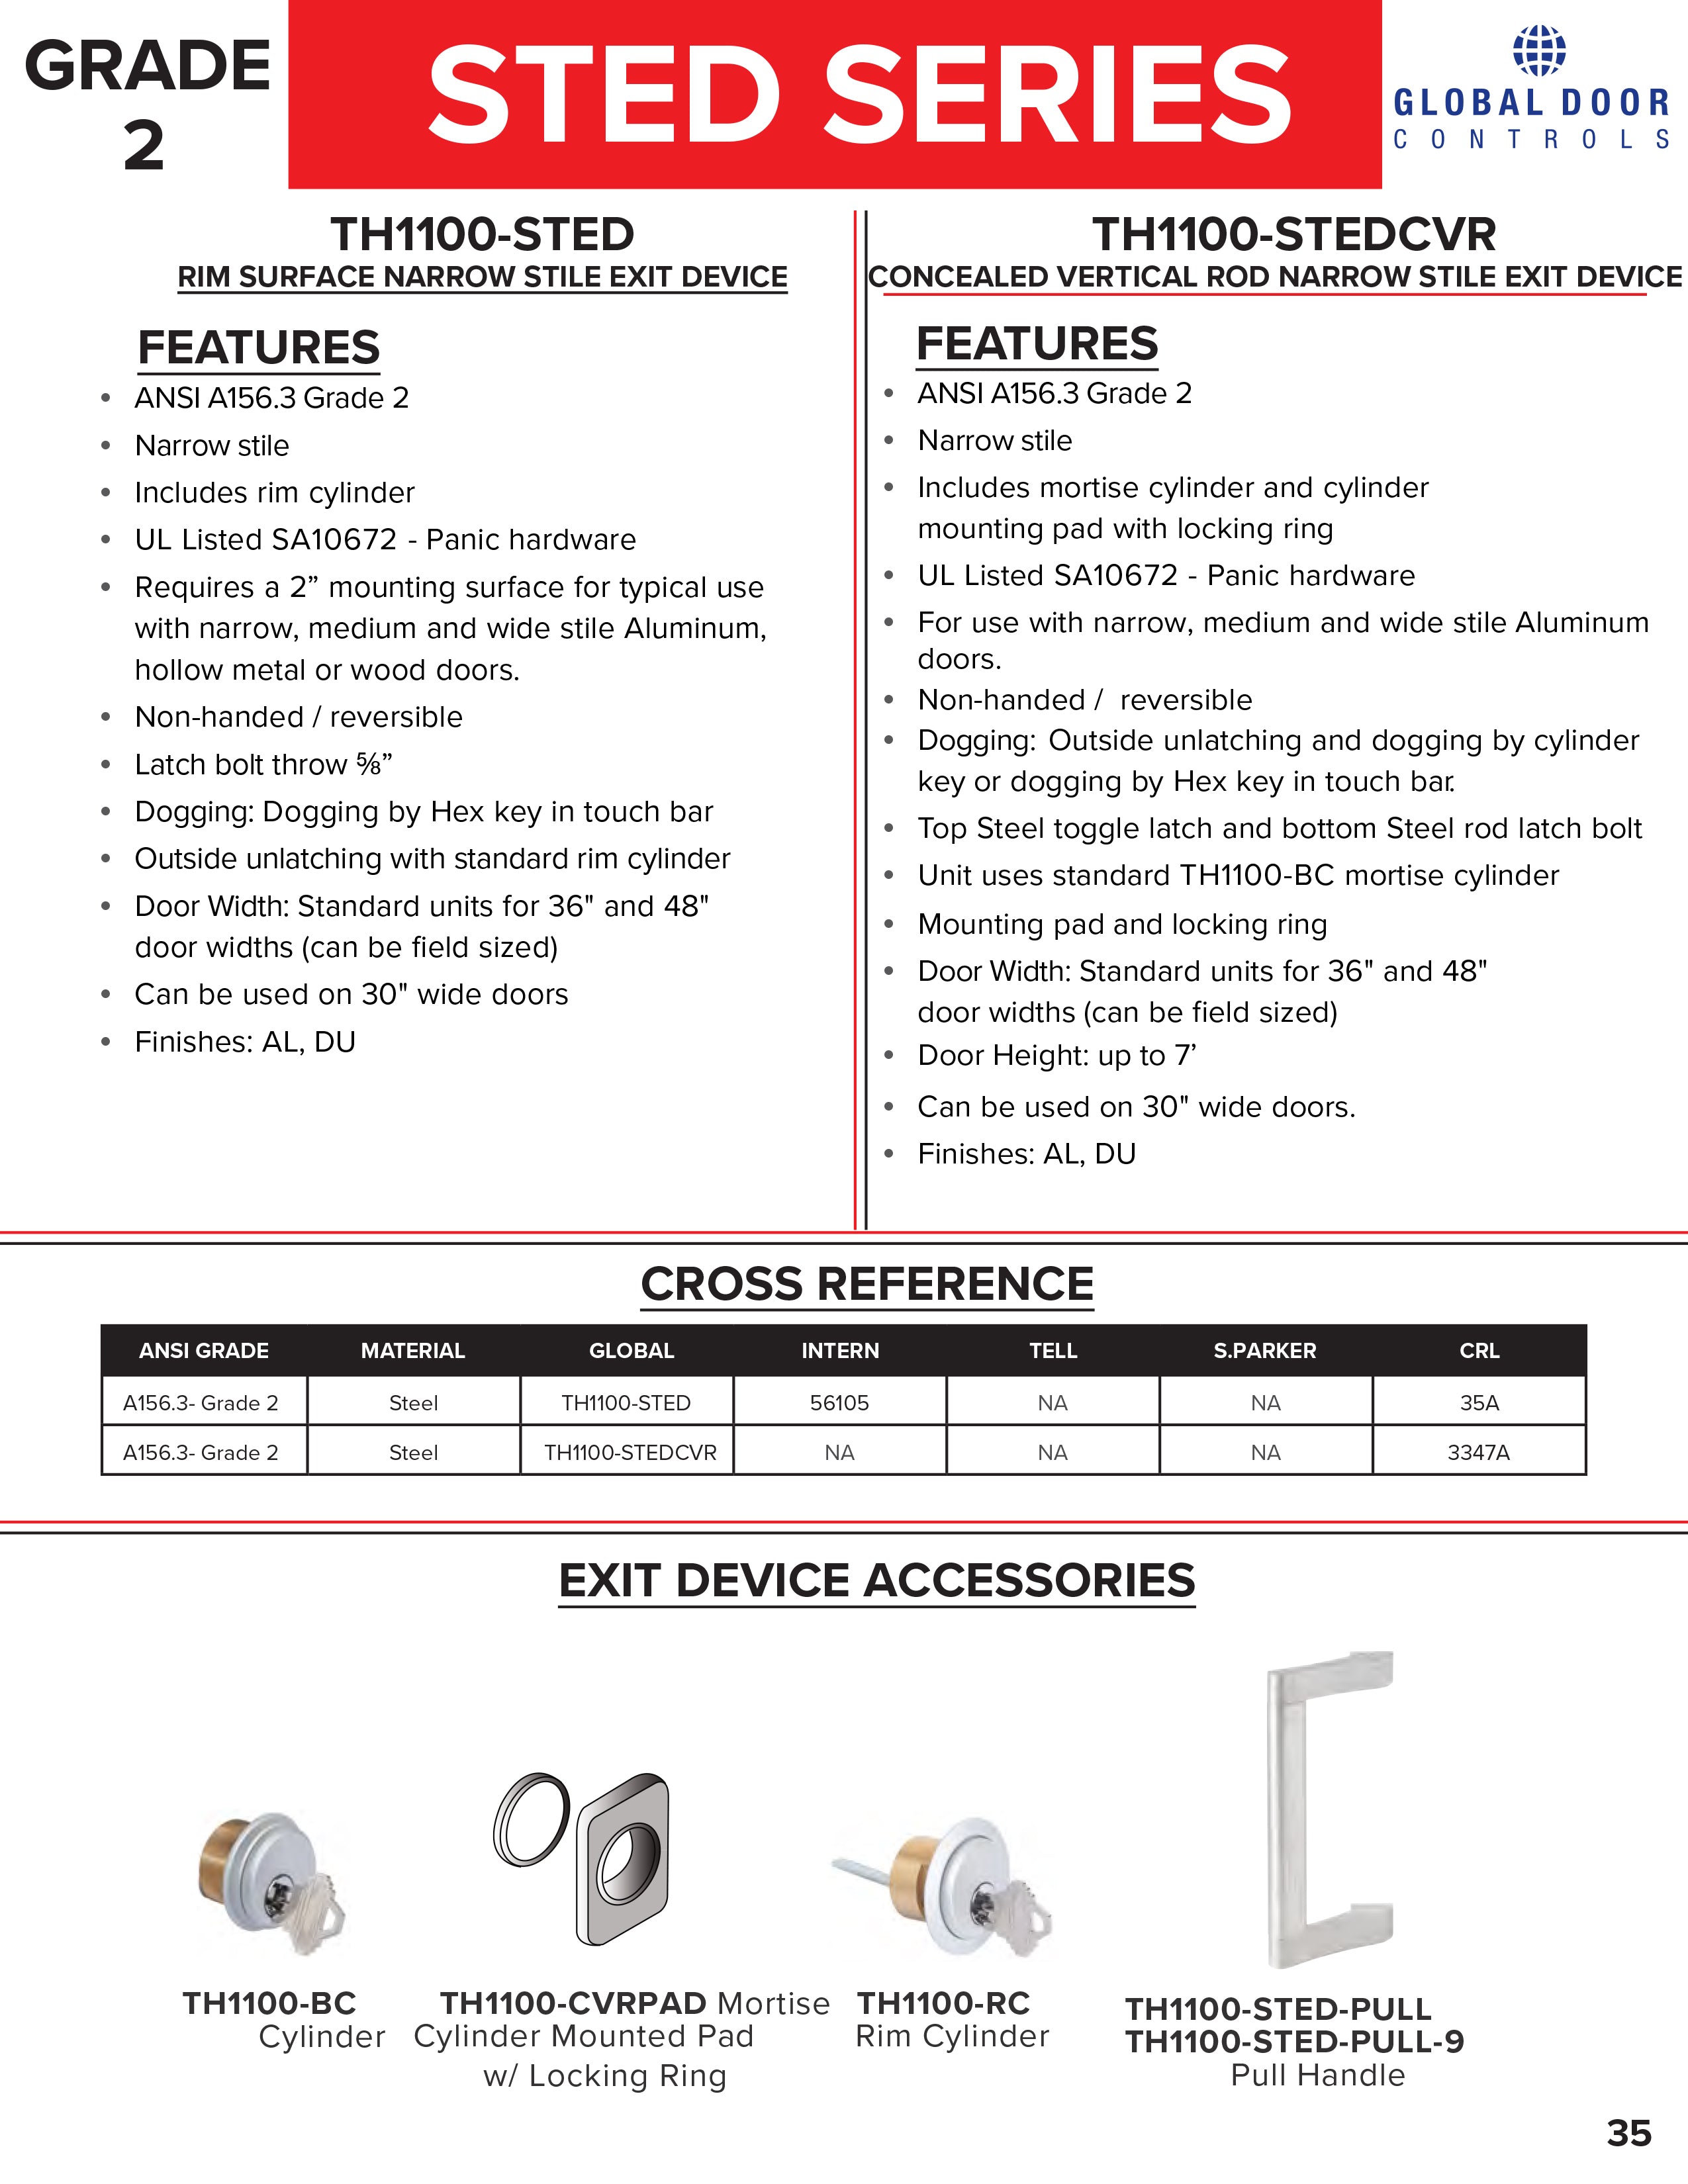 STED Series Grade 2 Storefront 36 in Concealed Vertical Rod Narrow Stile Panic Exit Device w/ Mortise Cylinder -  Pro-Edge HD